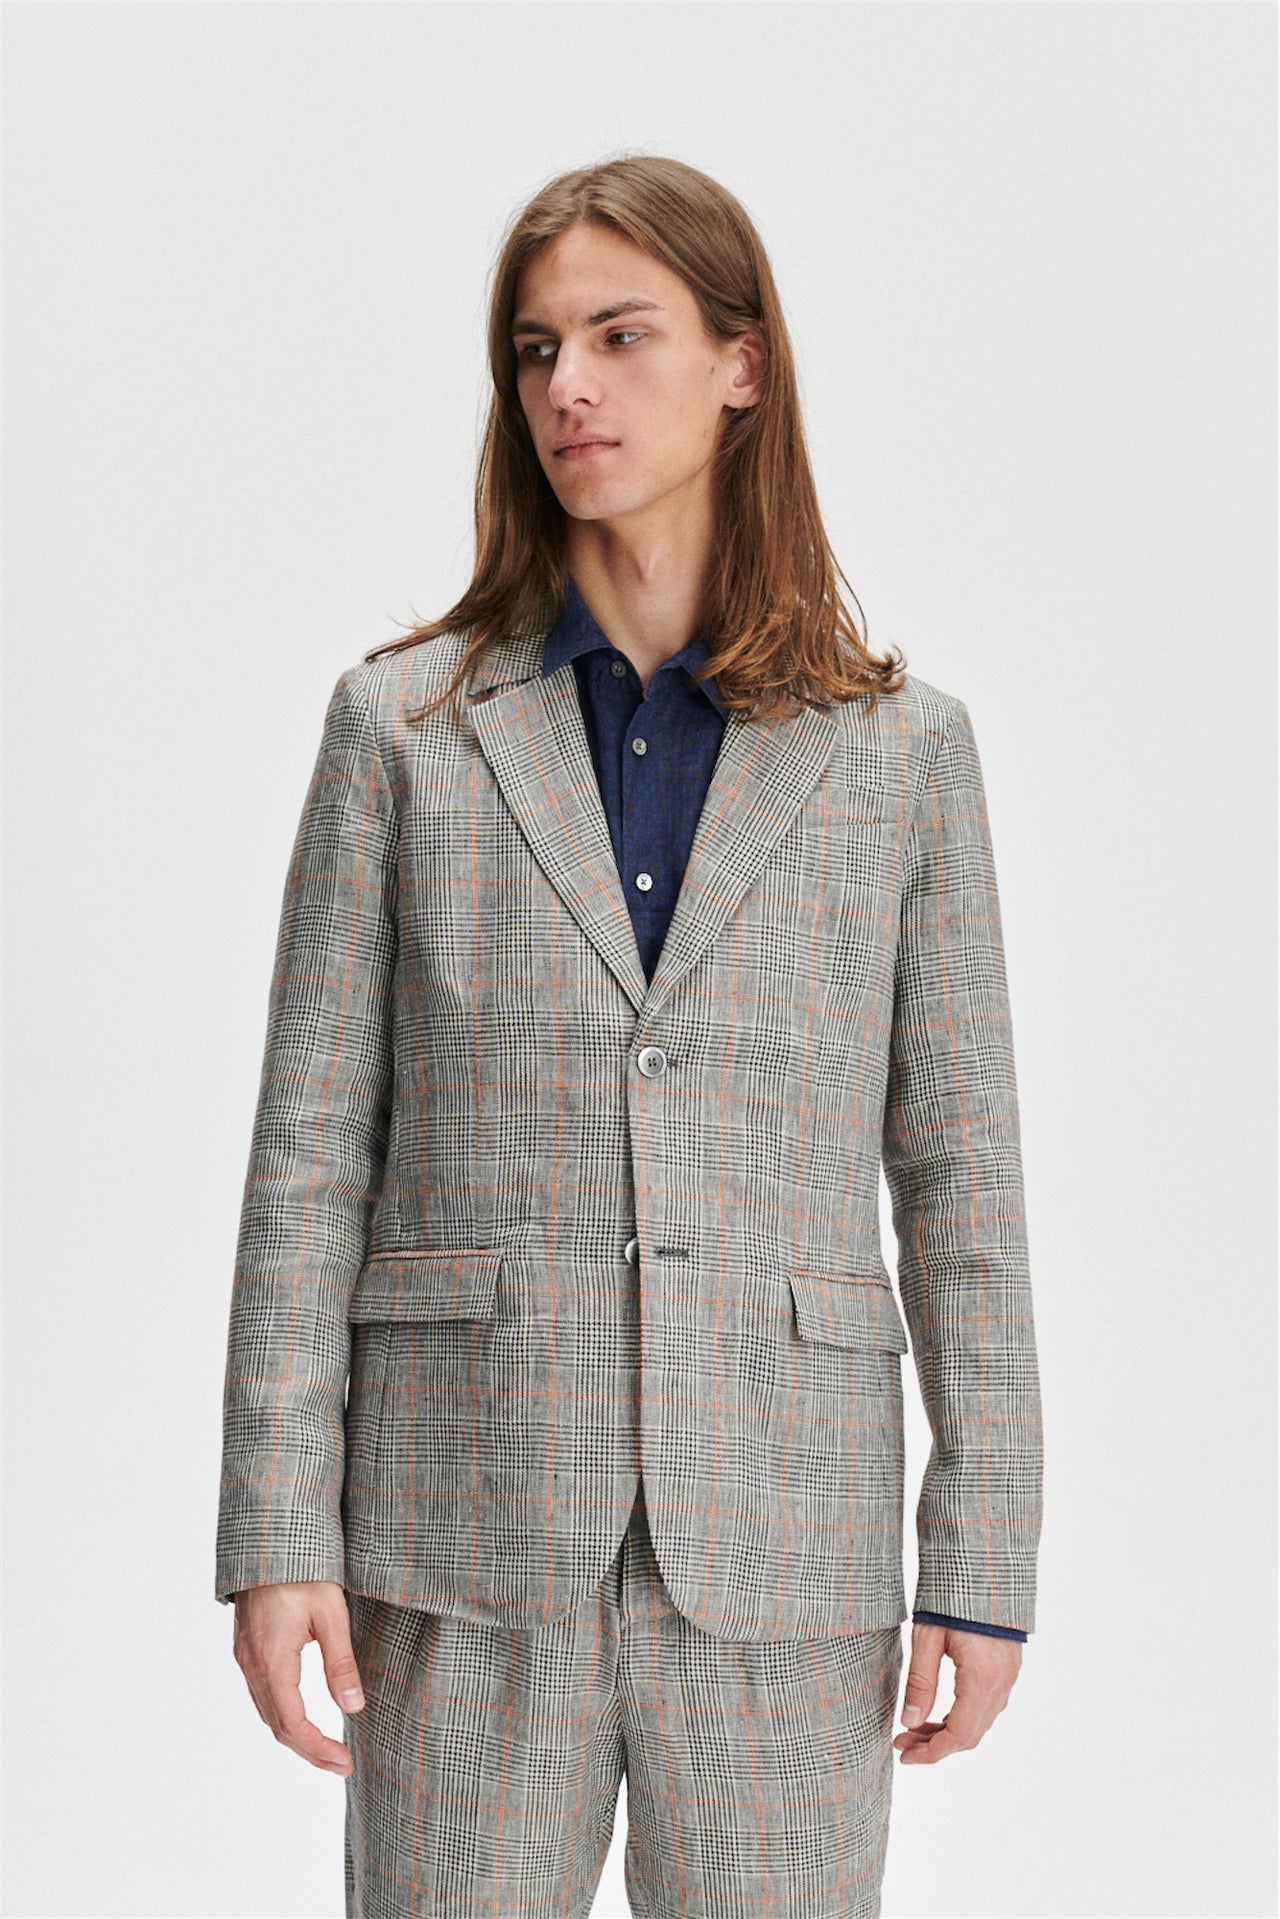 Blazer in a Grey and Vibrant Orange Prince of Wales Italian Linen